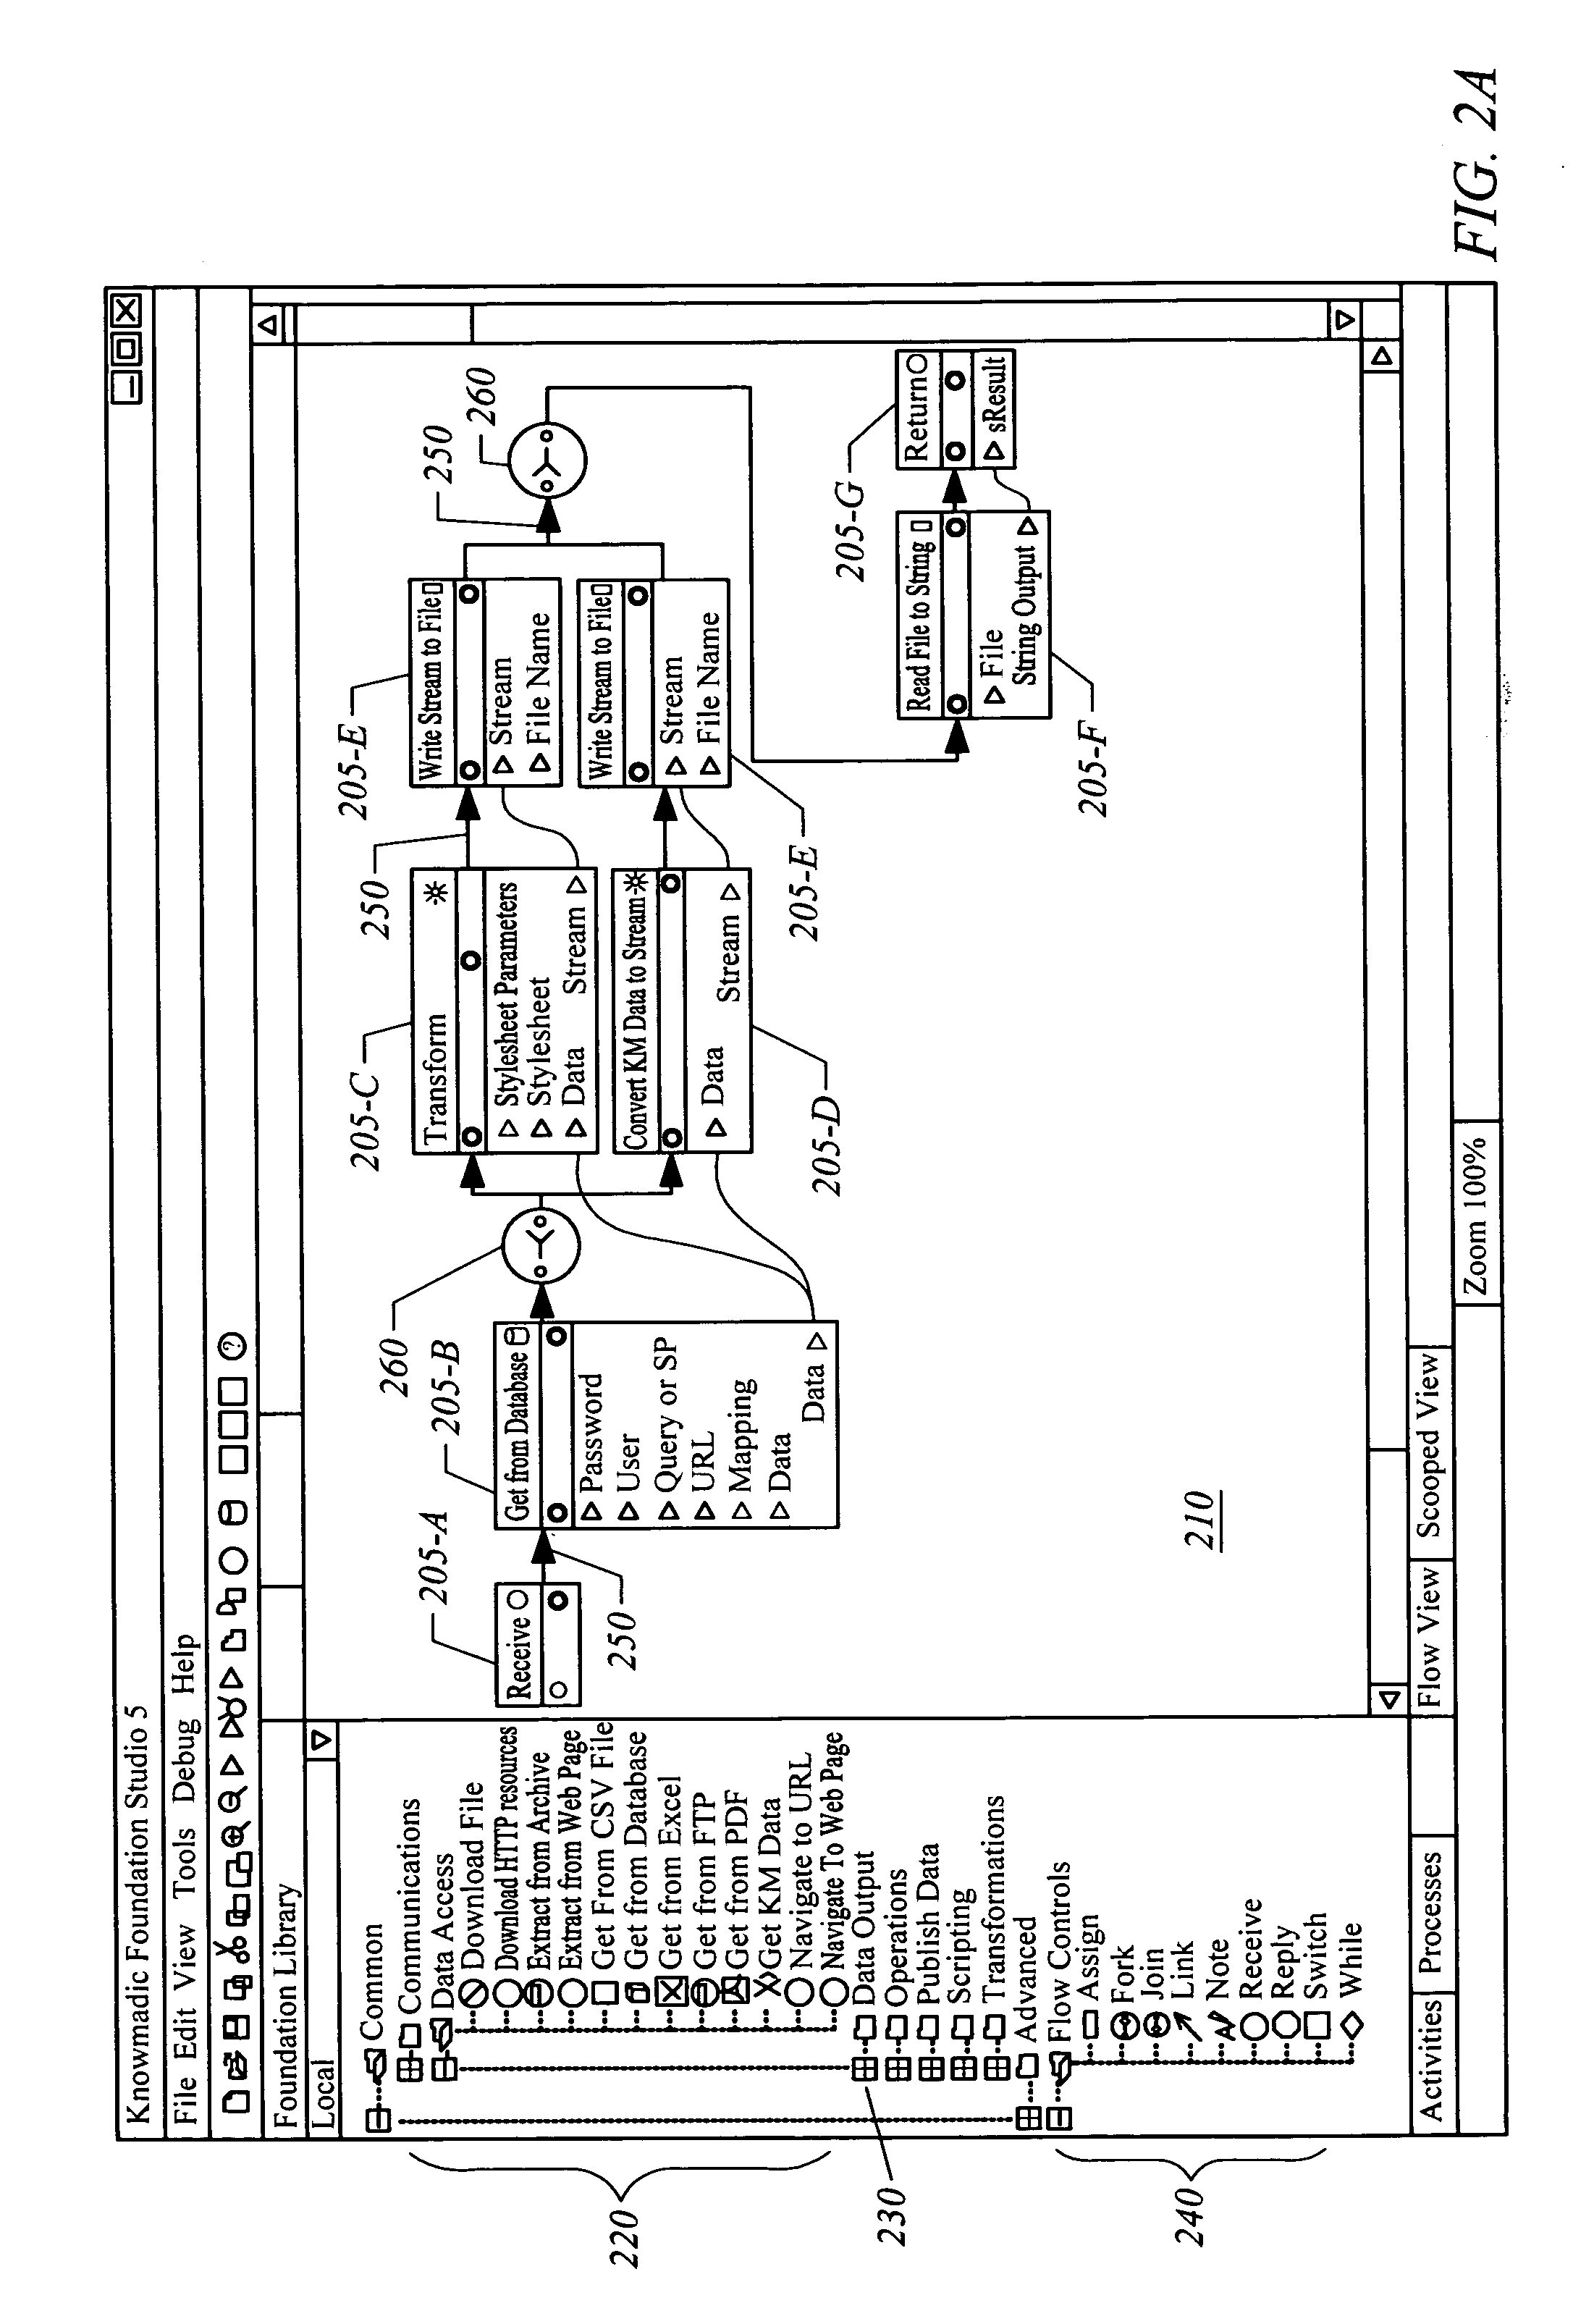 System and method for integrating disparate data and application sources using a web services orchestration platform with business process execution language (BPEL)